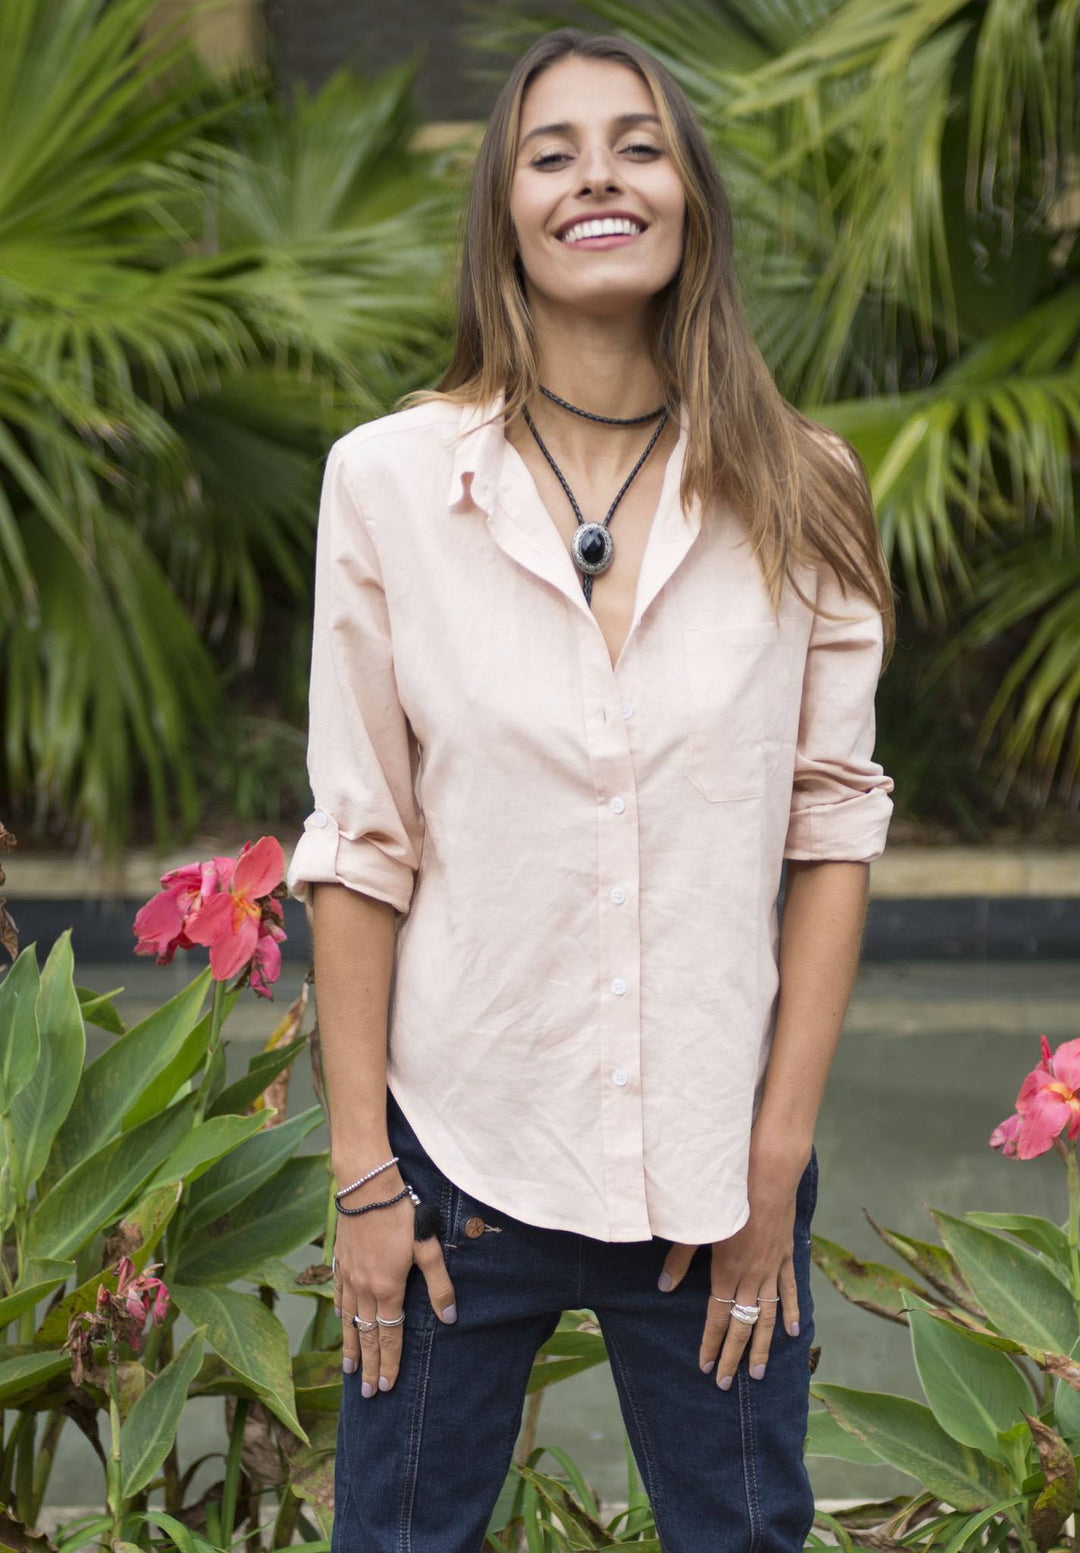 Febe-LS Tropical Blush linen shirt with roll-up tabs